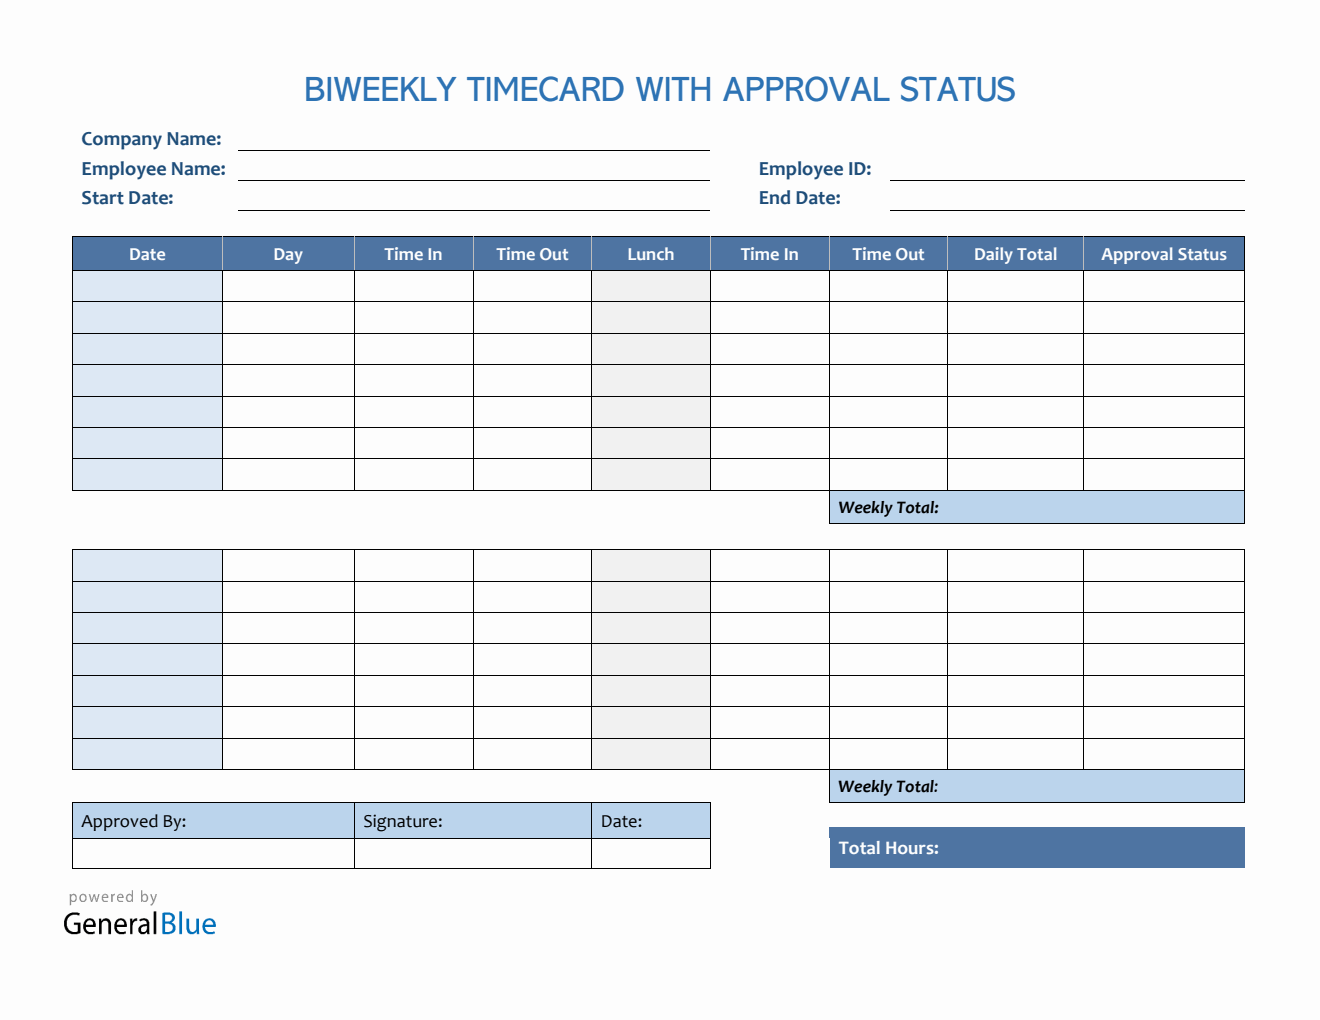 Biweekly Timecard With Approval Status in Word